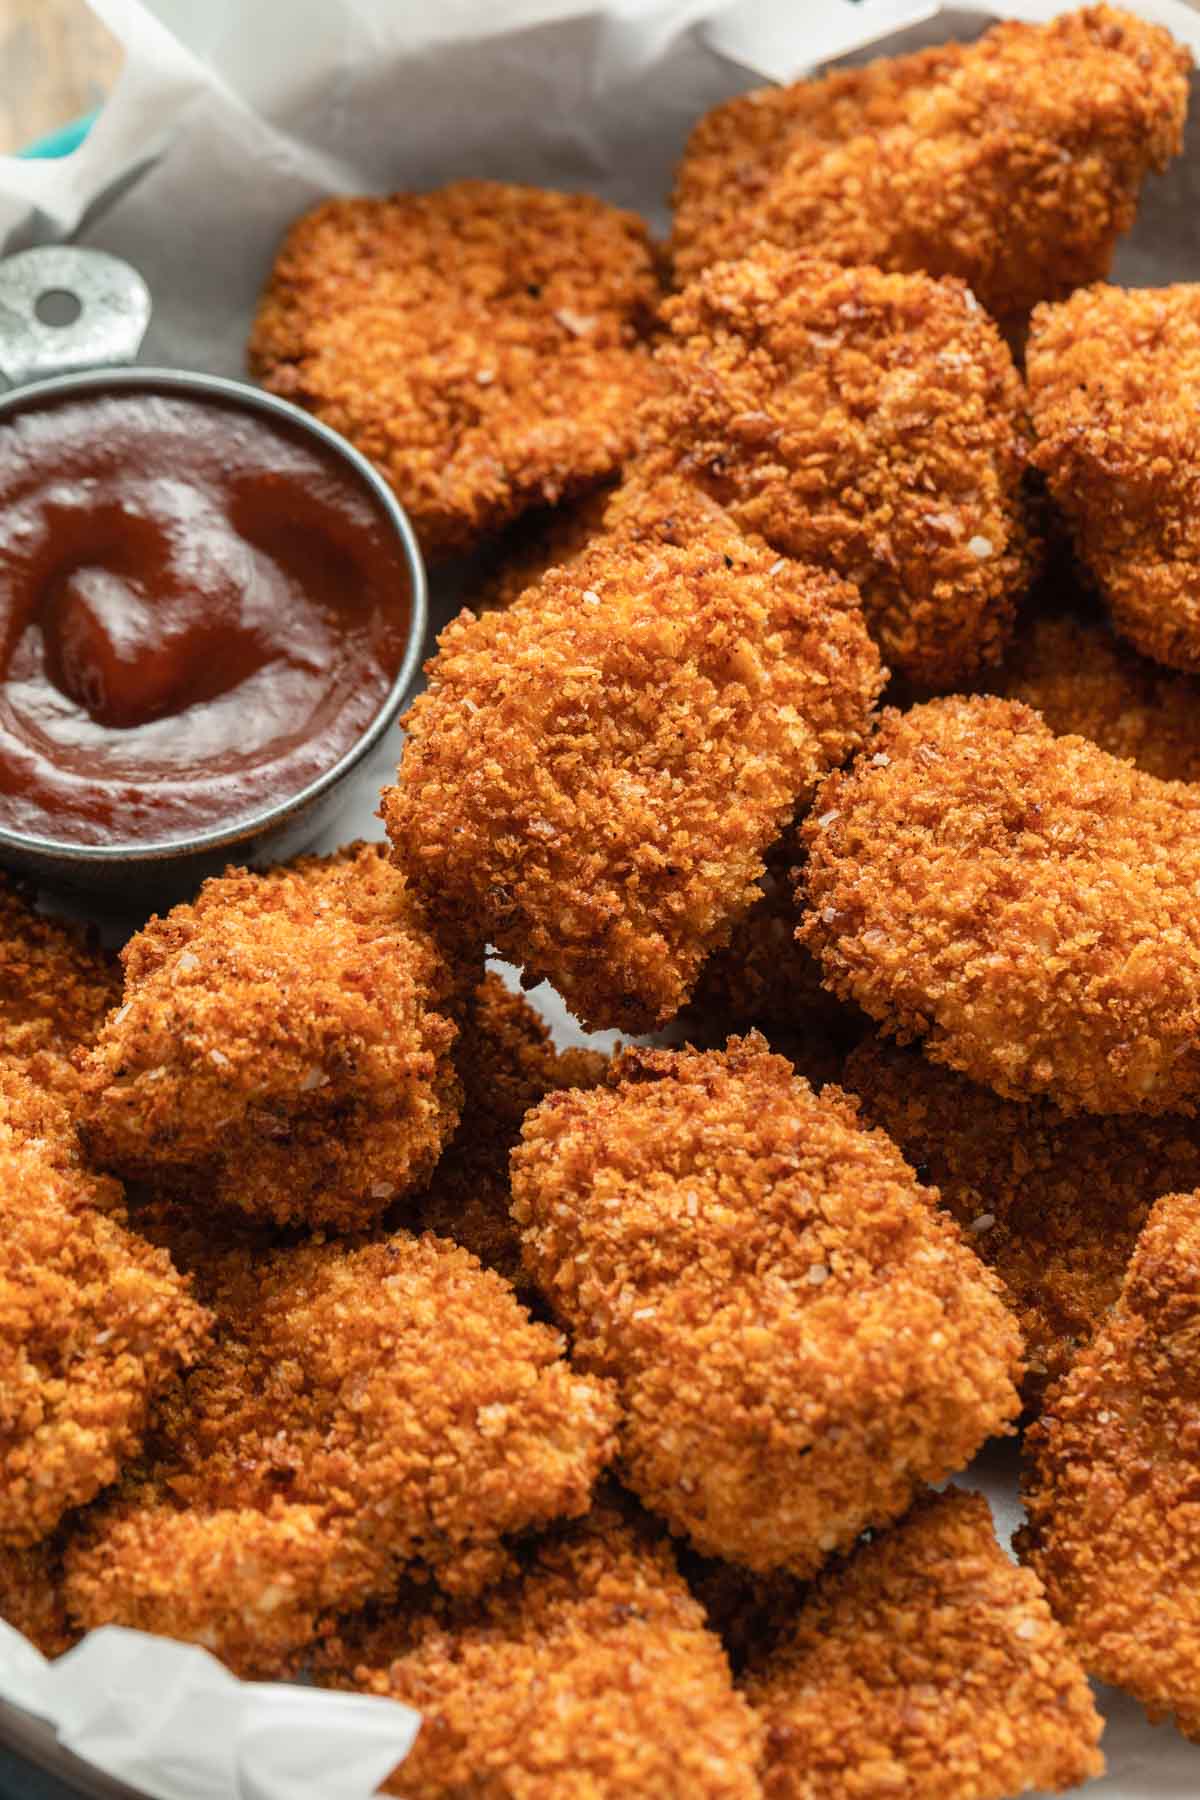 Crispy breaded chicken nuggets on a platter with BBQ for dipping.